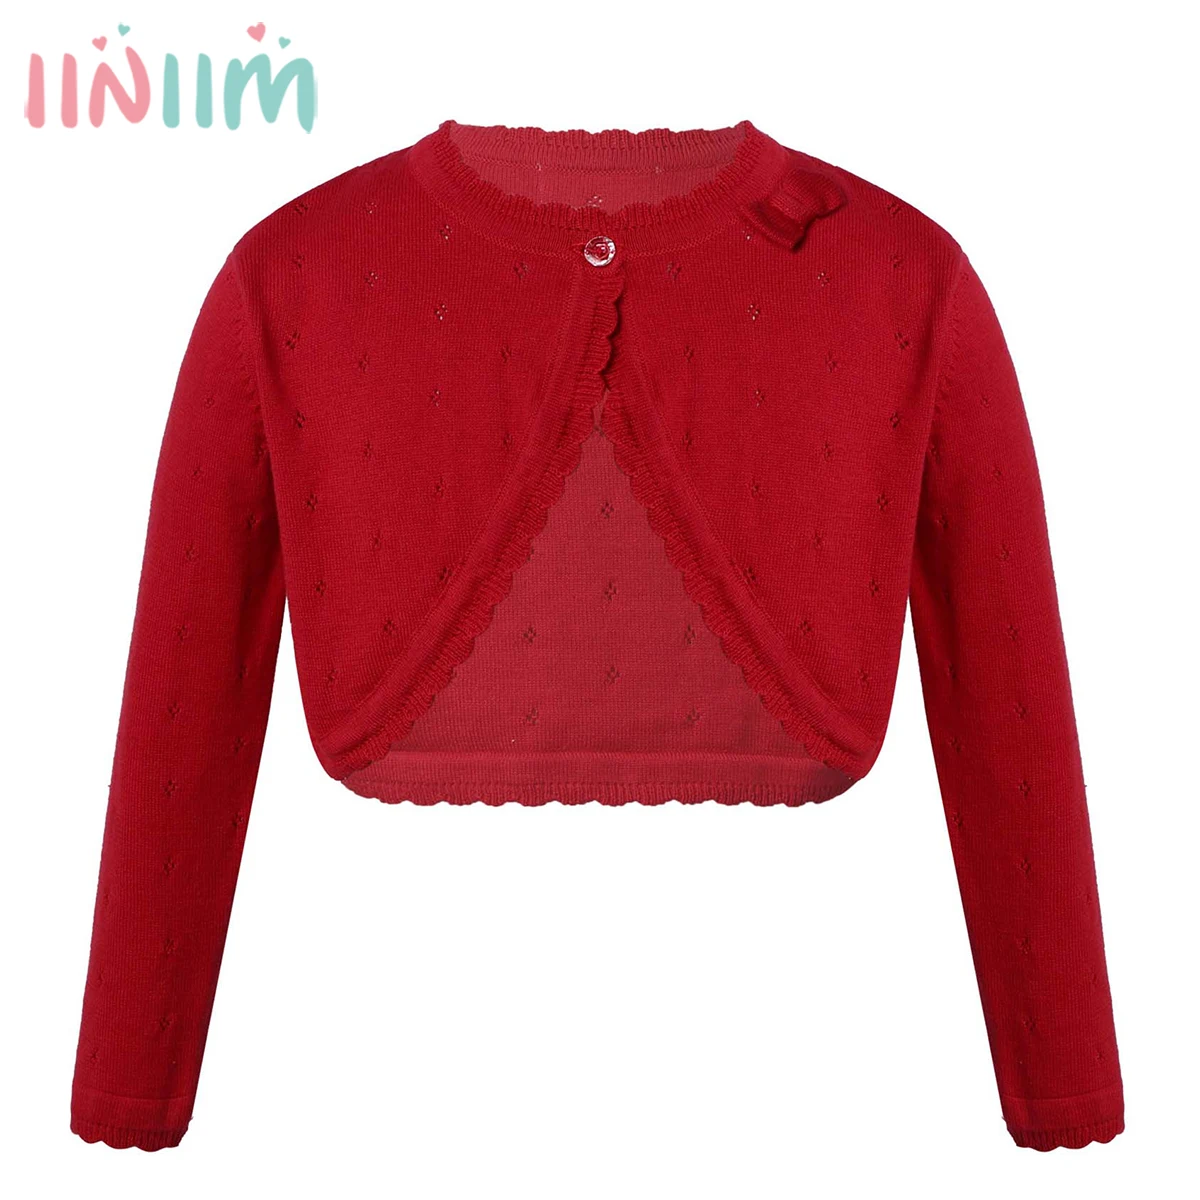 Bow Red Kids Cardigan Sweater Girl Outerwear Long Sleeve Cotton Girls Jacket For 2 4 6 8 10 12 13 Years Old Children Clothes